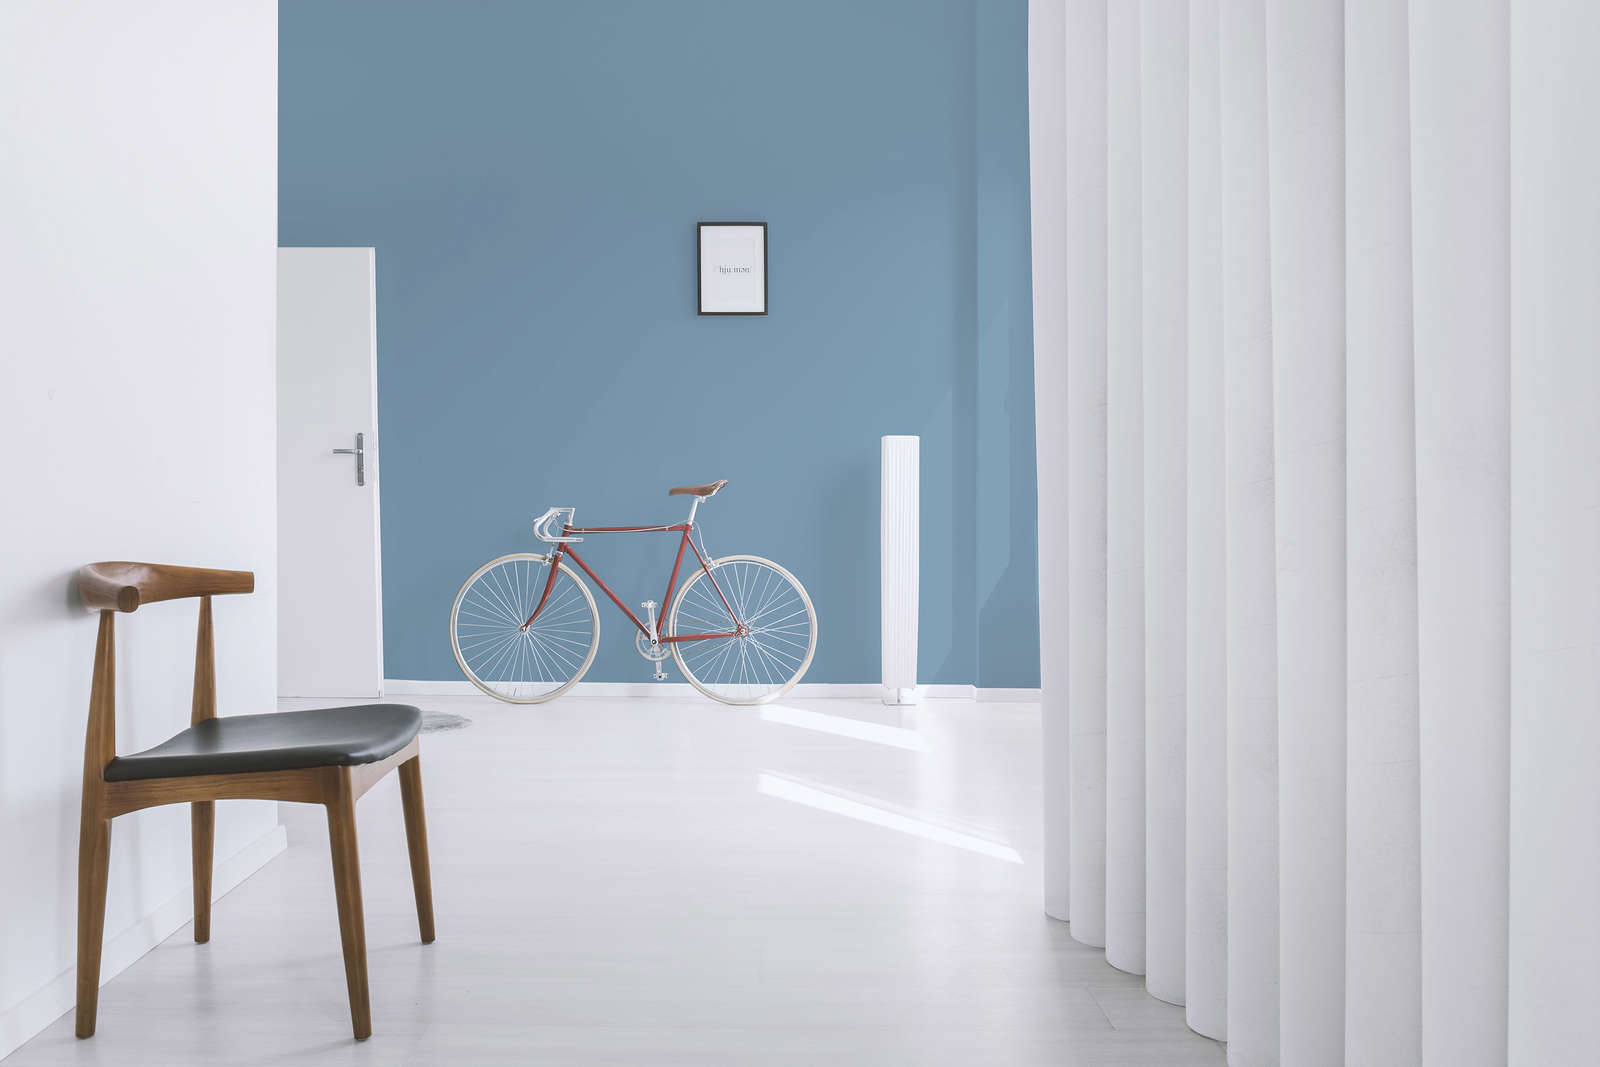             Premium Wall Paint Serene Nordic Blue »Blissful Blue« NW306 – 2.5 litre
        